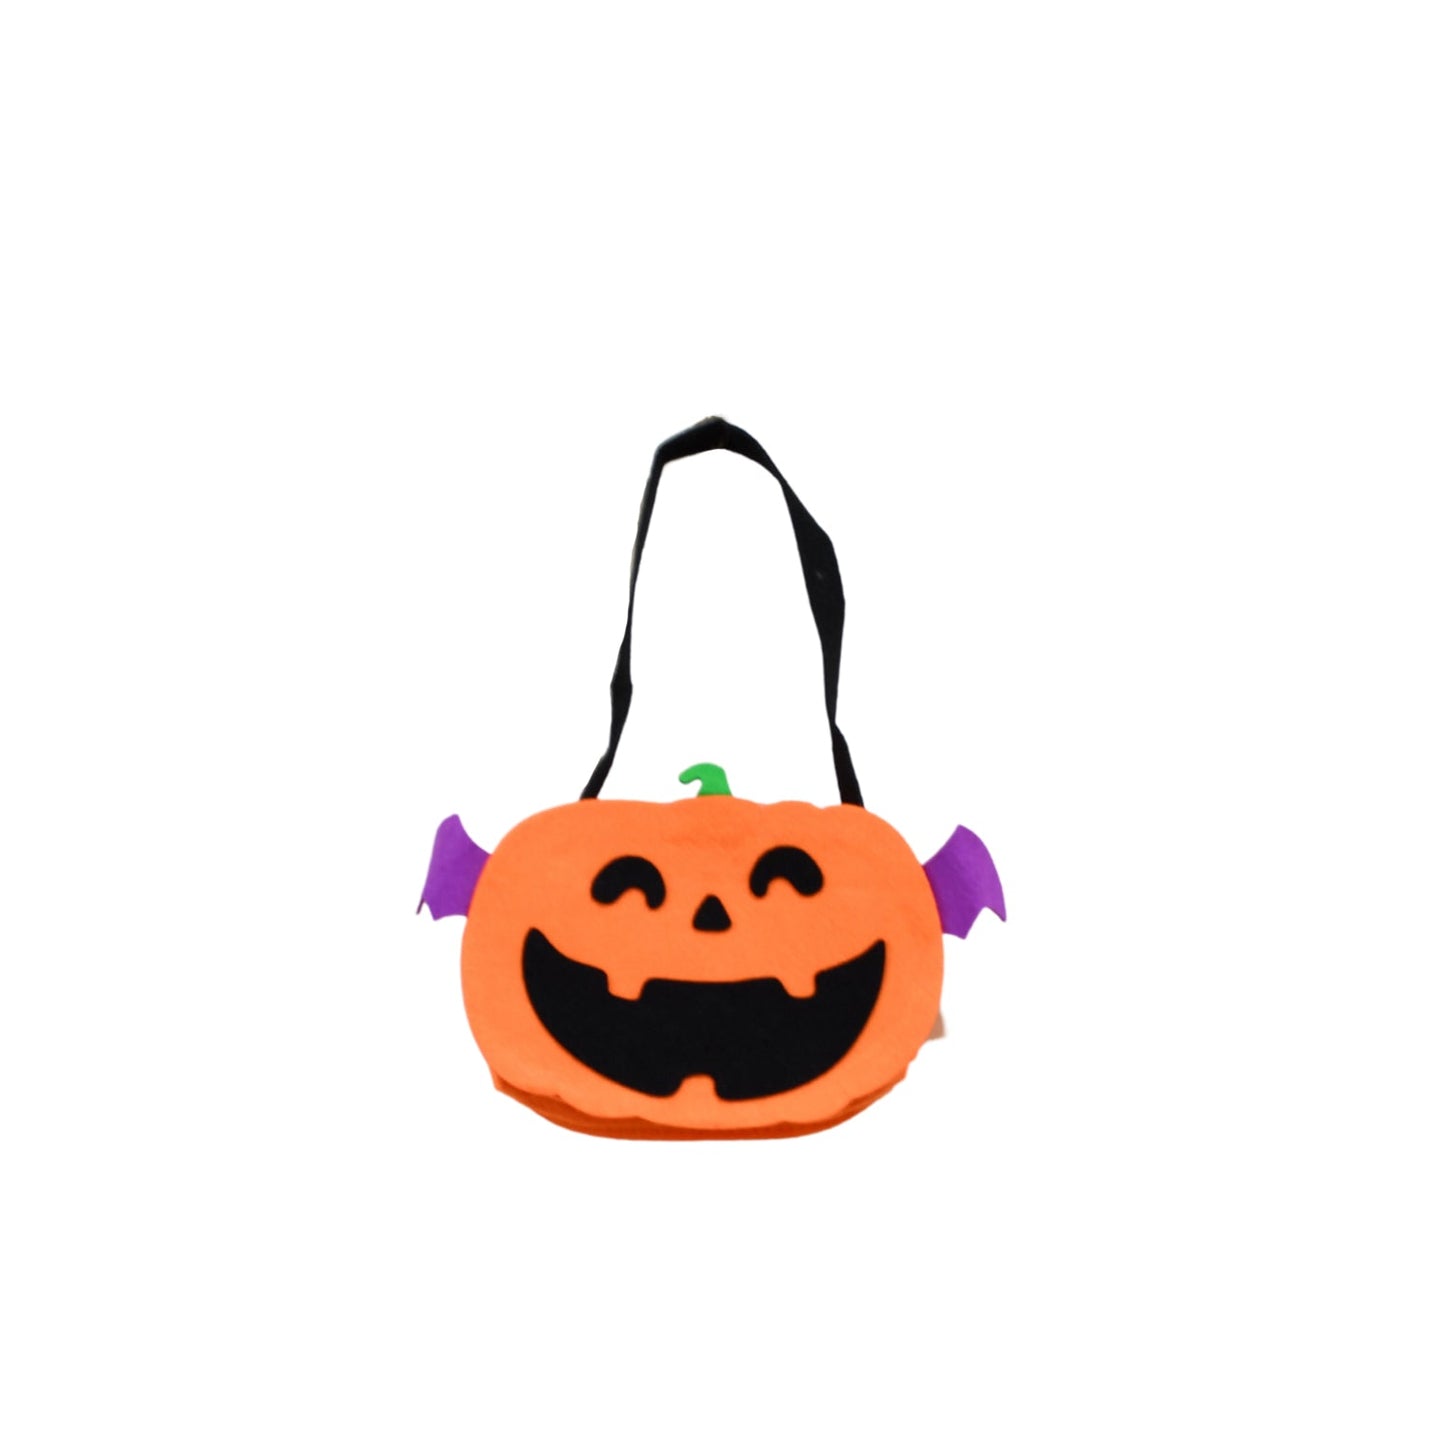 Halloween Pumpkin Bags Non- Woven Candy Bags Trick or Treat Bags Portable Tote Bag Cartoon Goodie Handbag for Halloween Party Favors, Kids Gift Bag